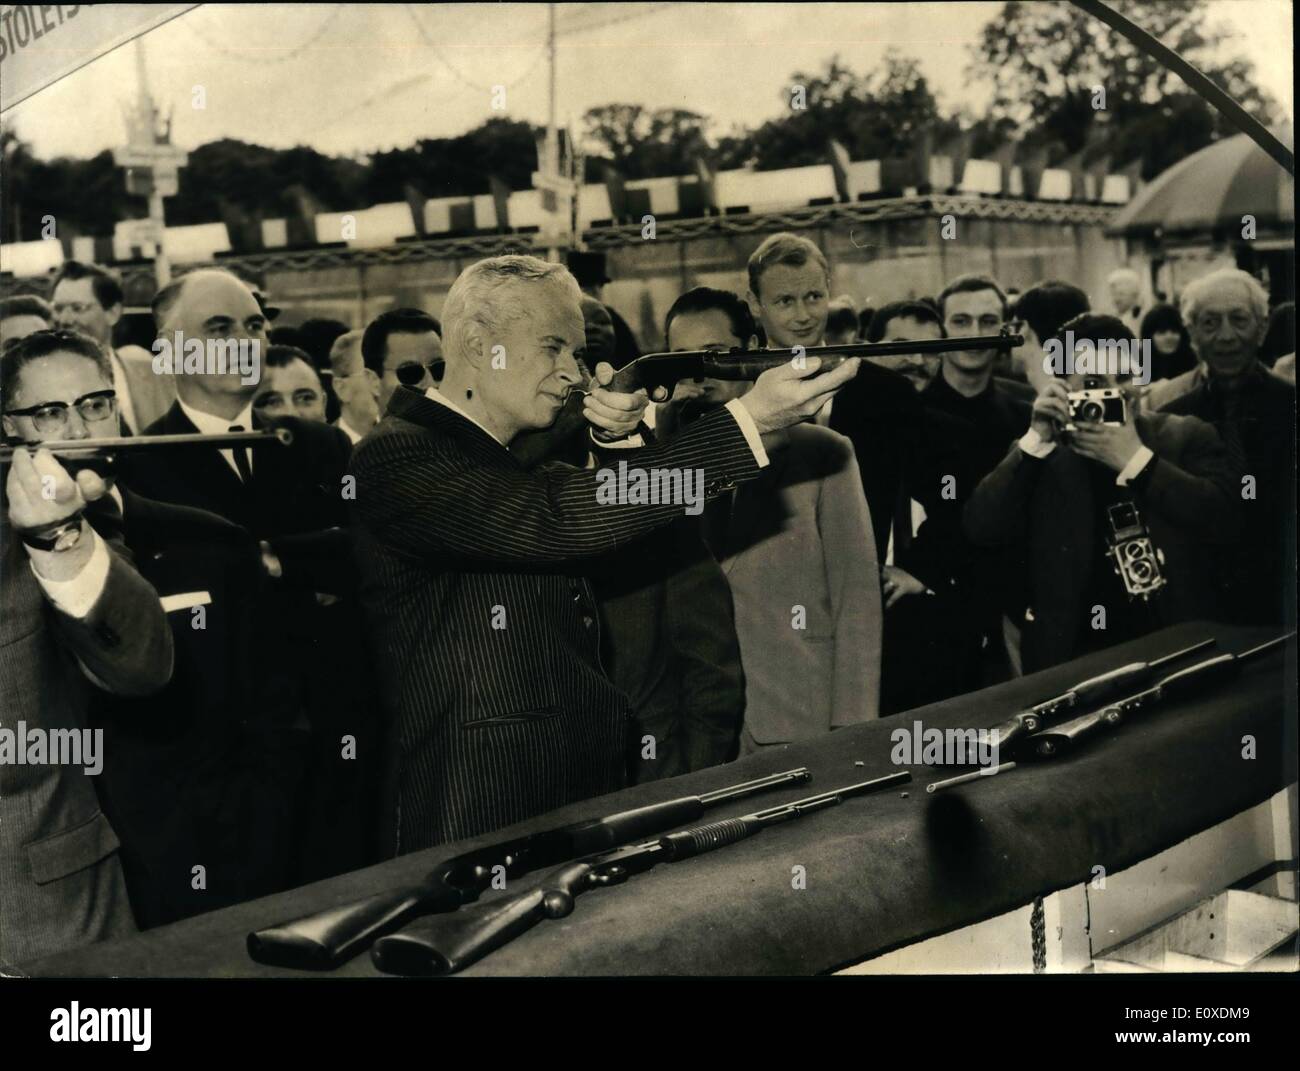 May 05, 1966 - The Sharpshooter is the home setary: Mr. Roger Frey, French Minister of the Interior, was the guest of Paris s Stock Photo